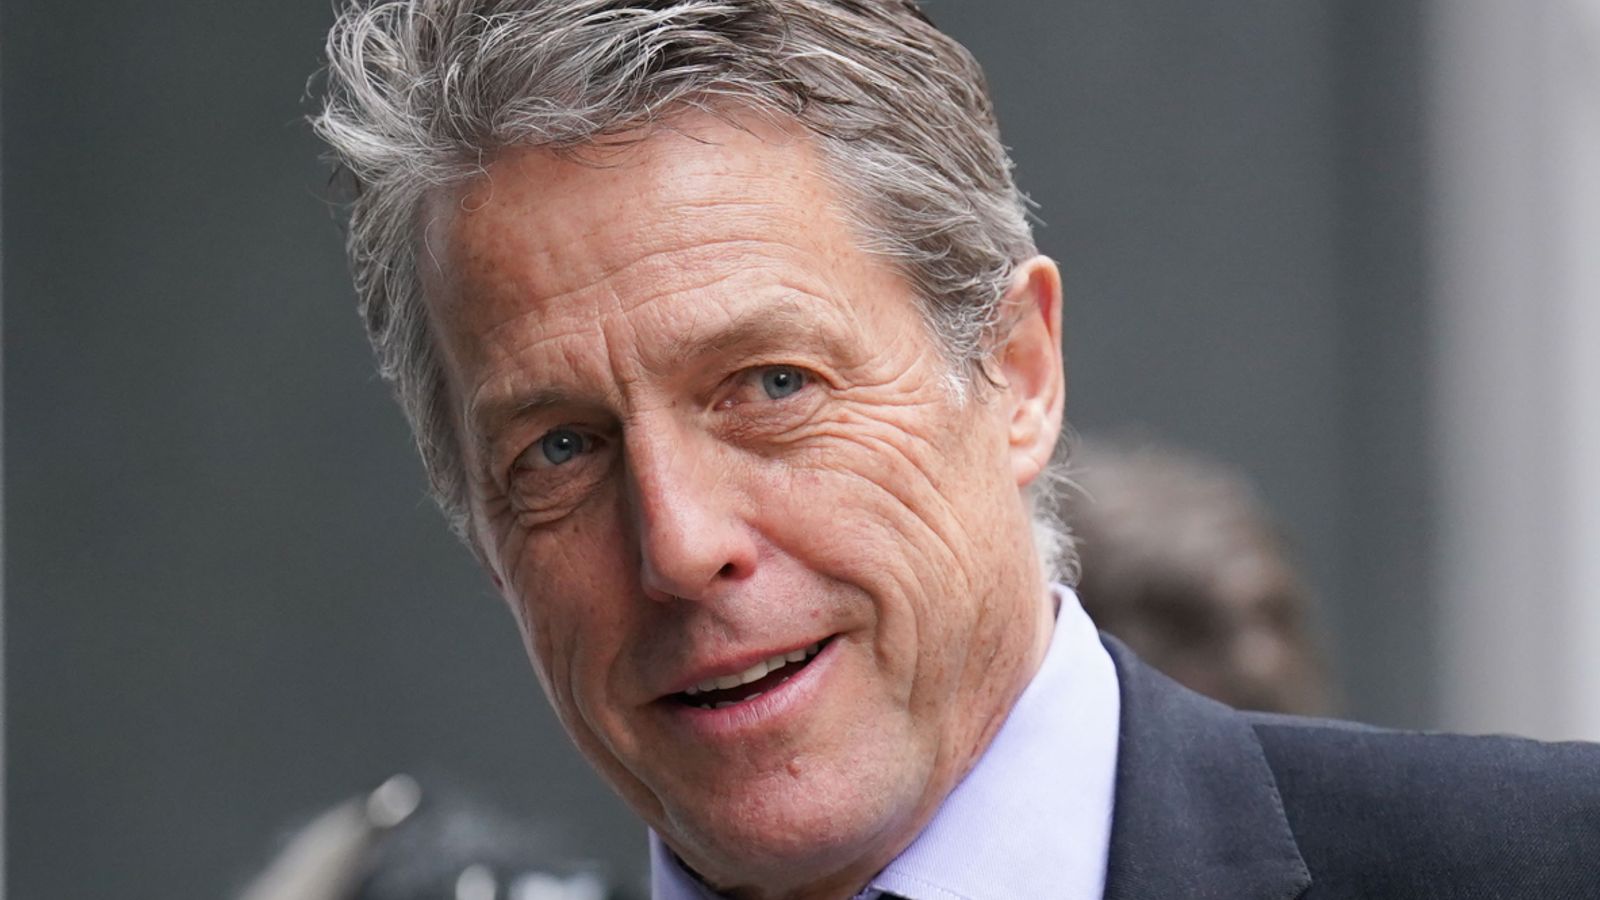 Hugh Grant tells court that The Sun used 'burglaries to order' and 'bugging' to obtain private information